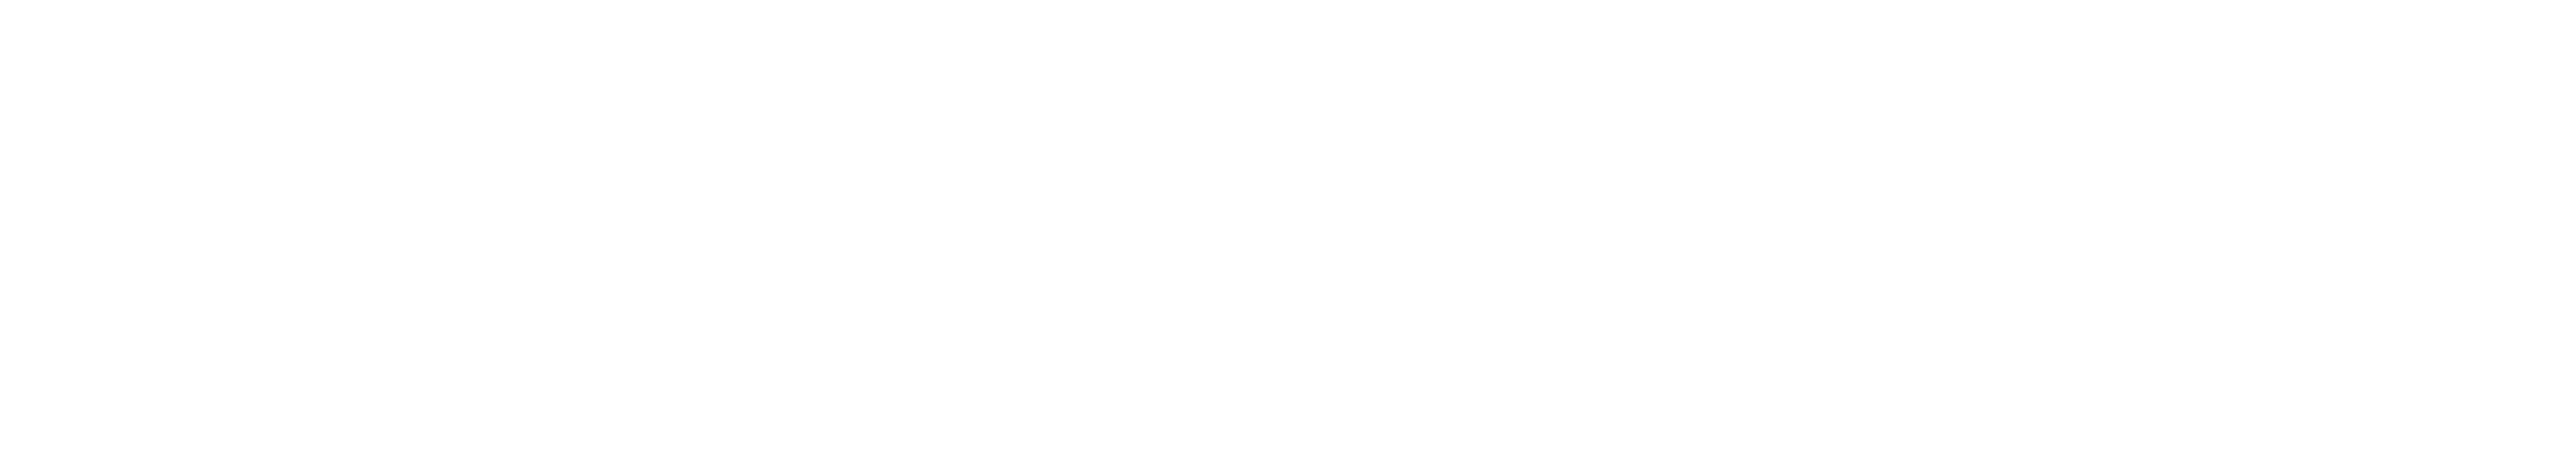 White The Gateway Adult and Community Education Centre logo on a transparent background